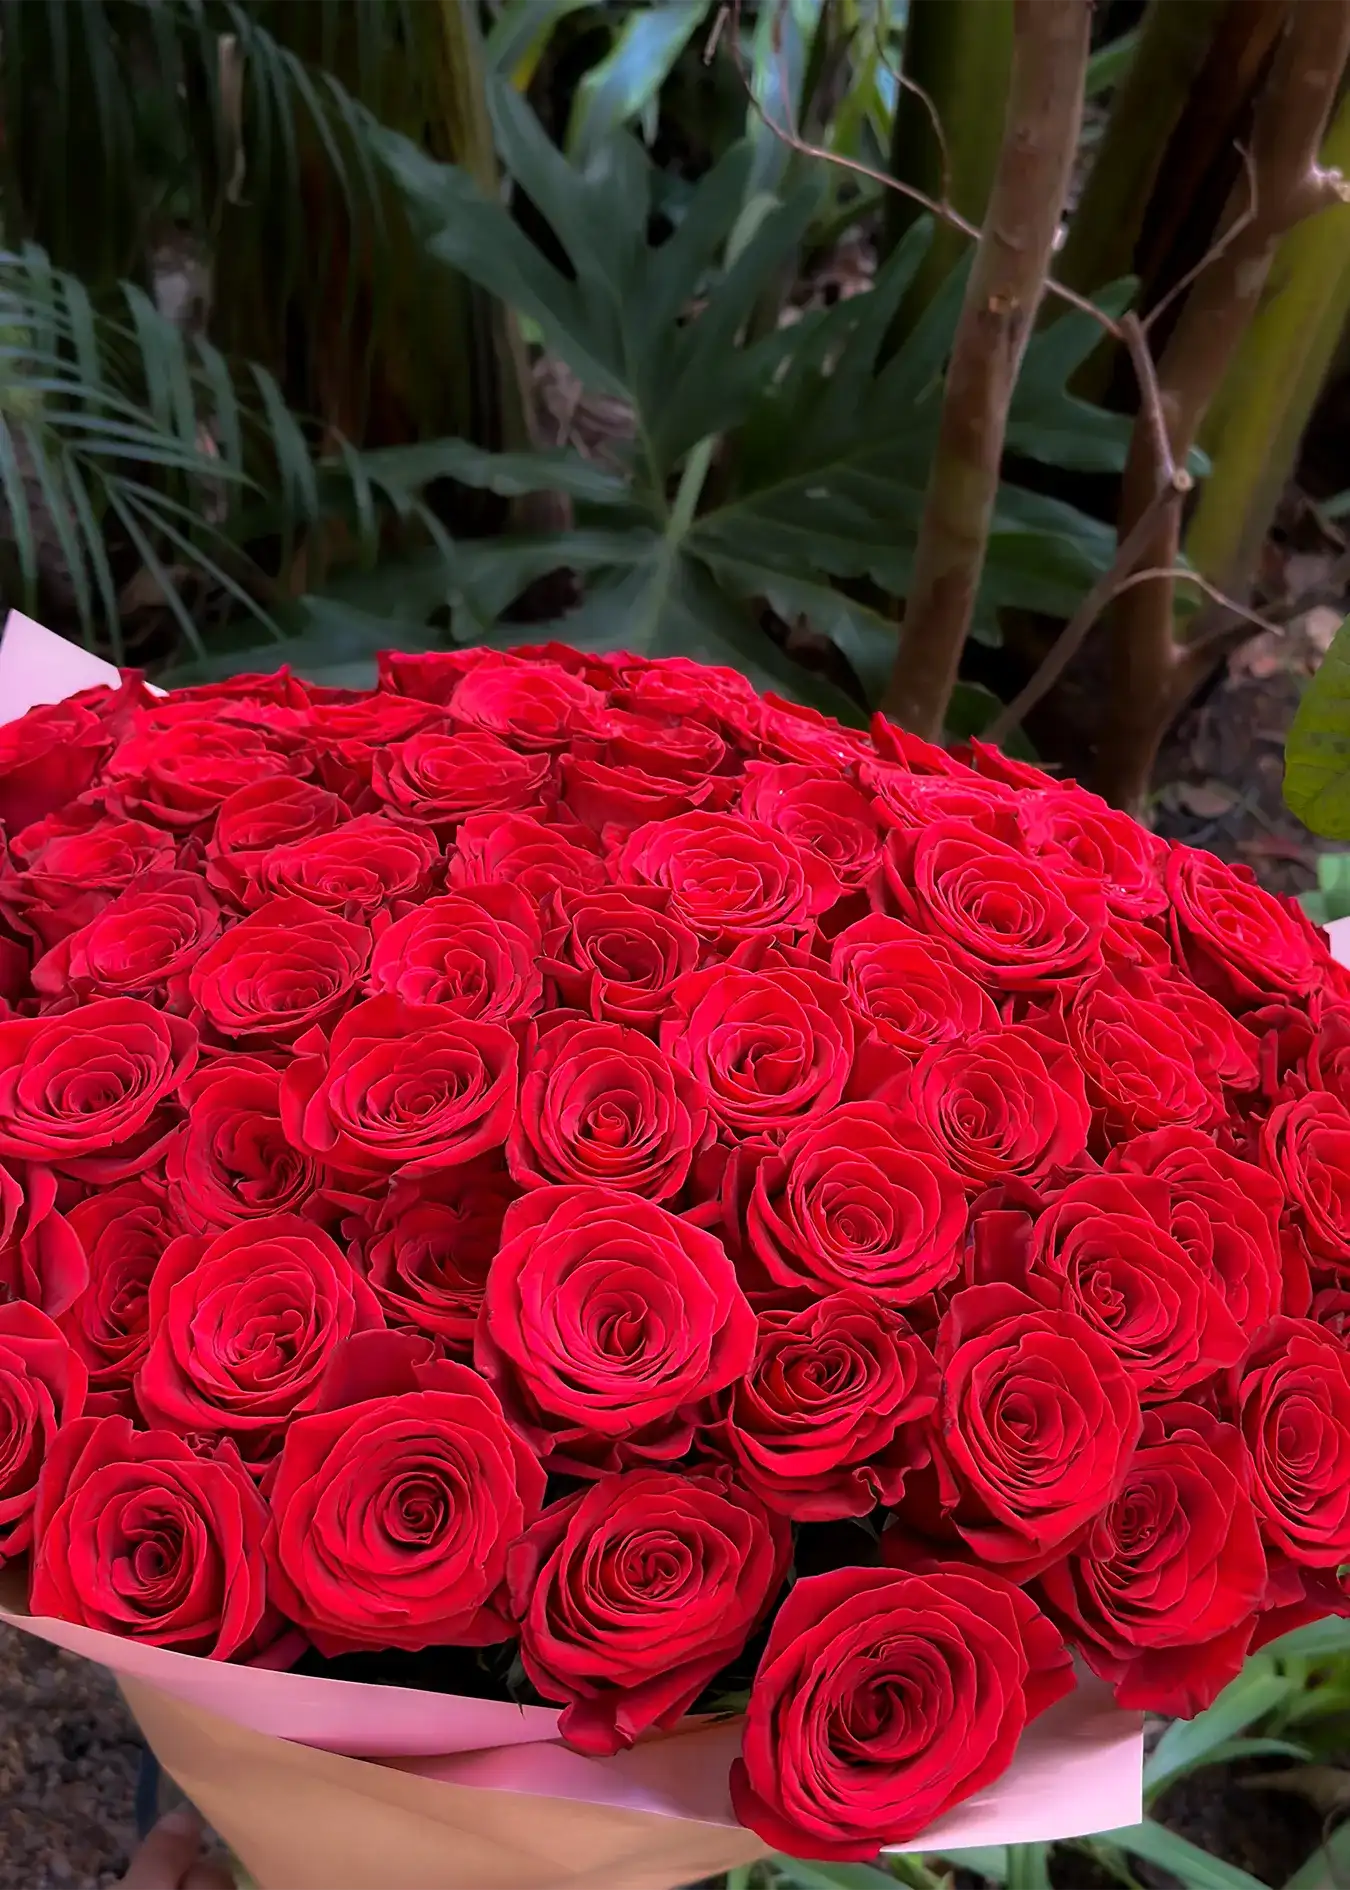 NO. 8. Bouquet of Gorgeous 100 Red Roses